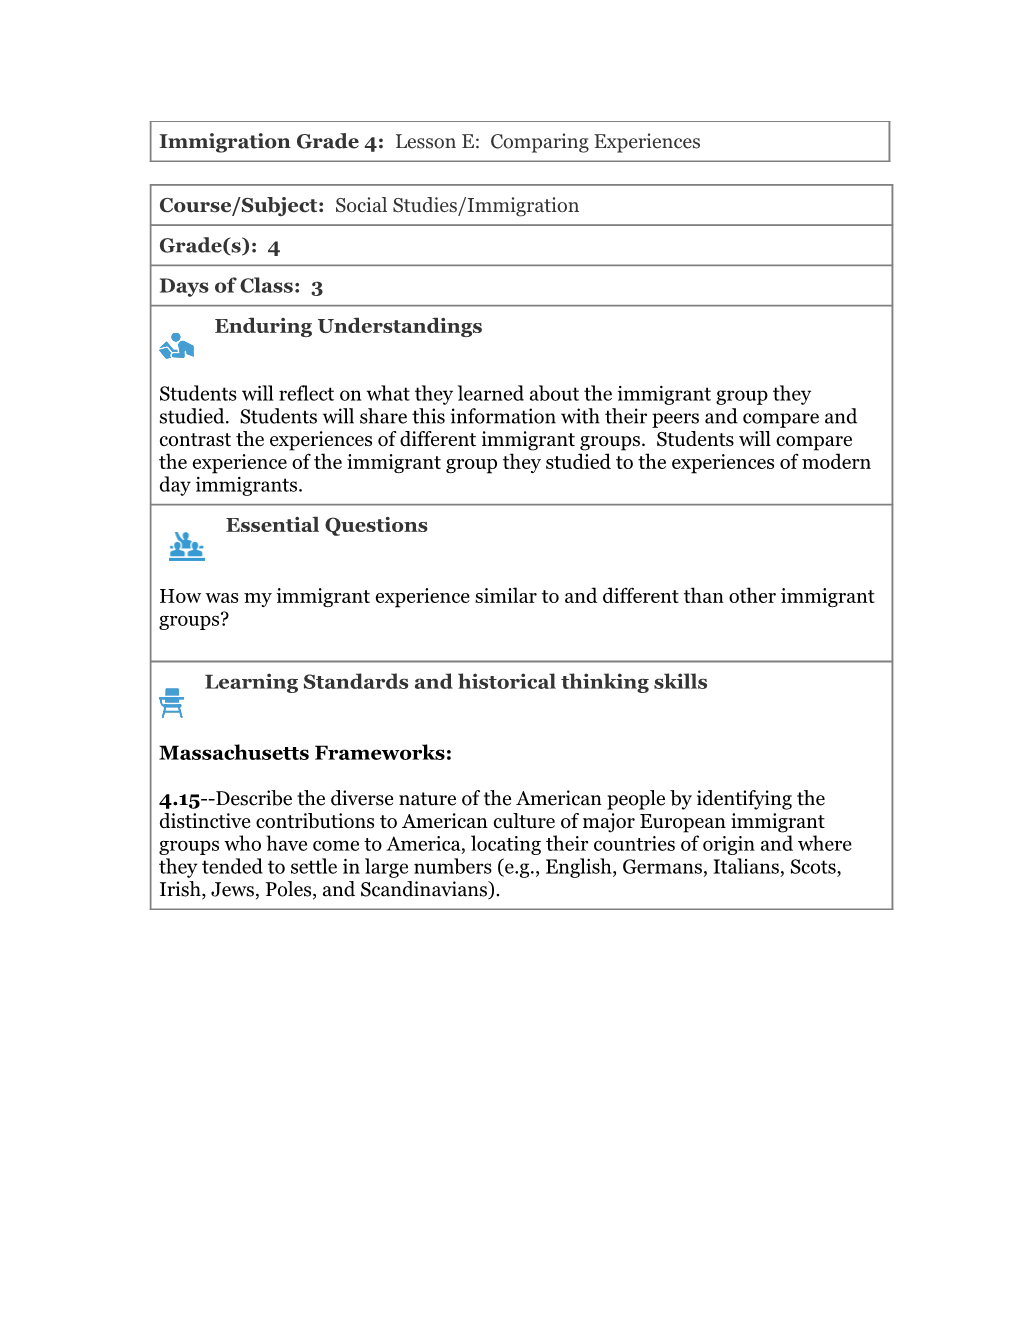 Daily Lesson Plan Template s1